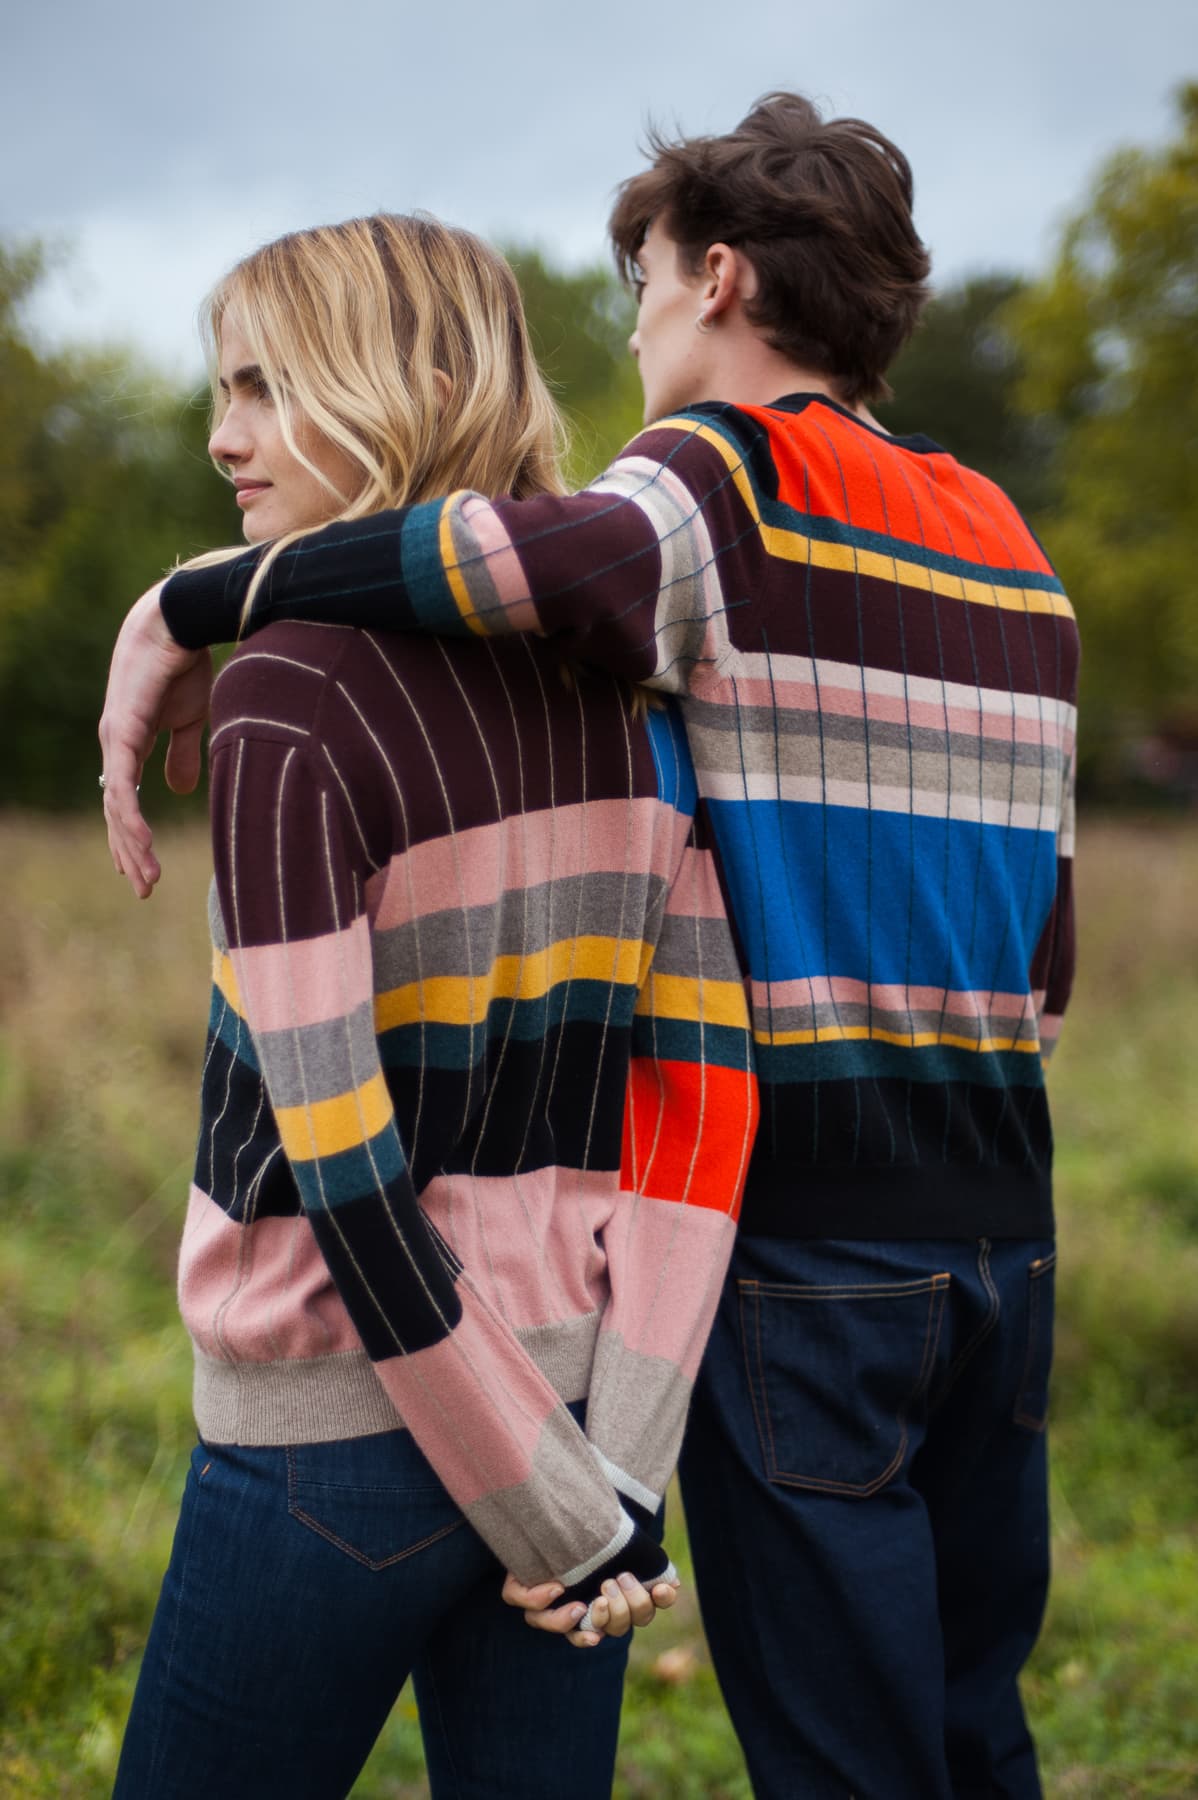 stories-aw18-anni-albers-jumper-group.jpg